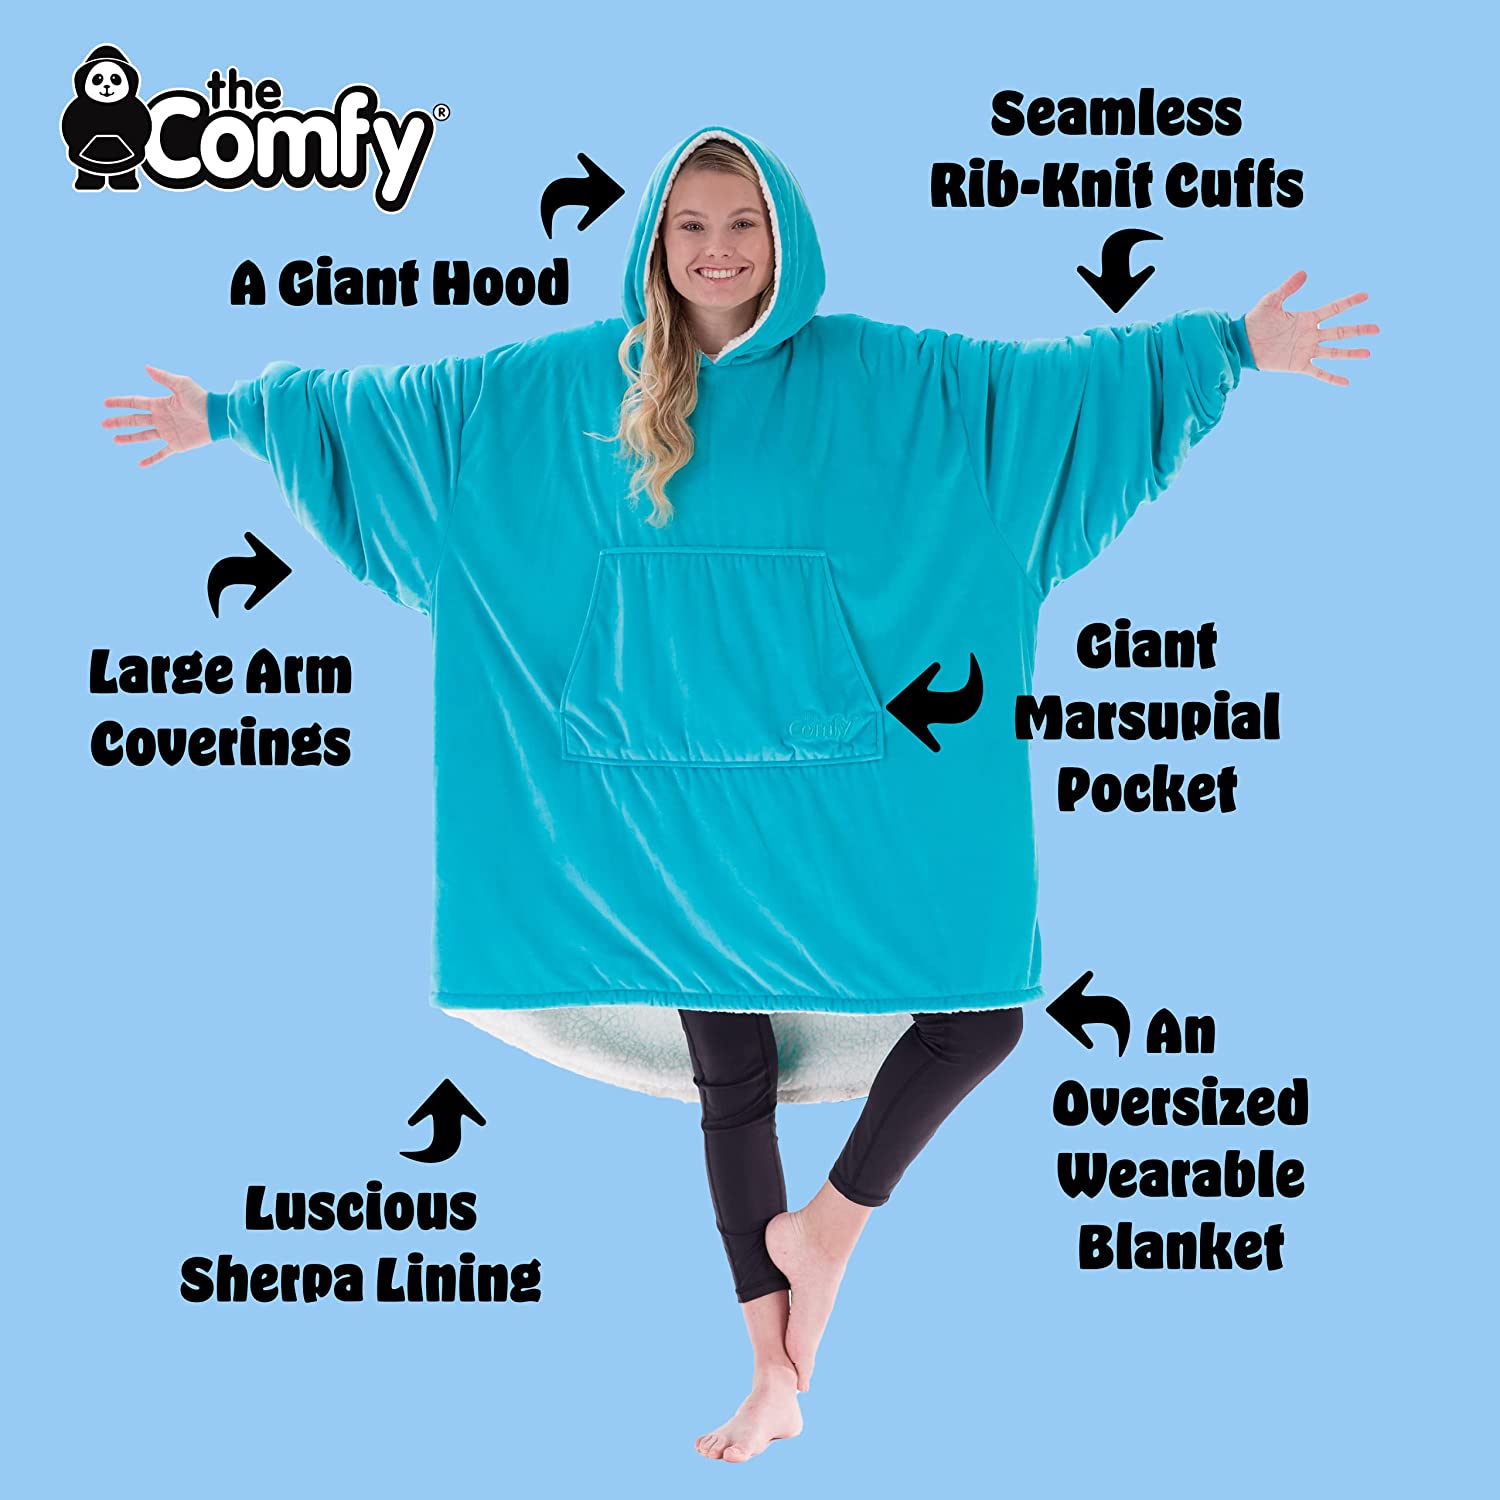 A woman is wearing a giant oversized wearable blanket. There is text which reads, "Seamless rib knit cuffs. Giant marsupial pocket. An oversized wearable blanket. Luscious Sherpa lining. large arm coverings. A giant hood."